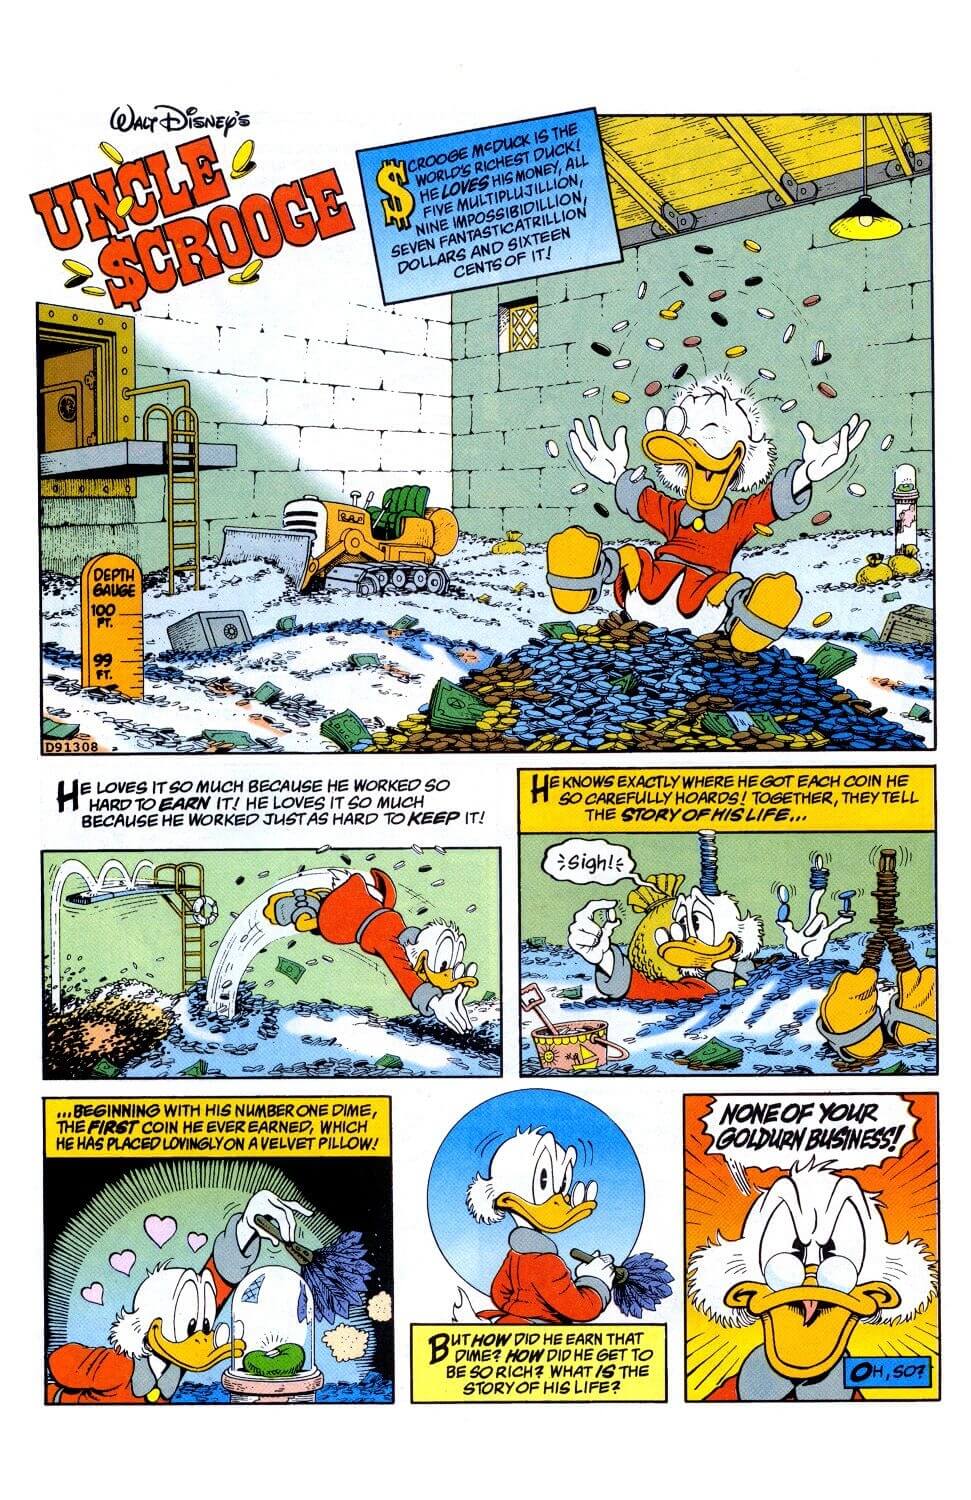 Chapter 01 - The Last of the Clan McDuck first page